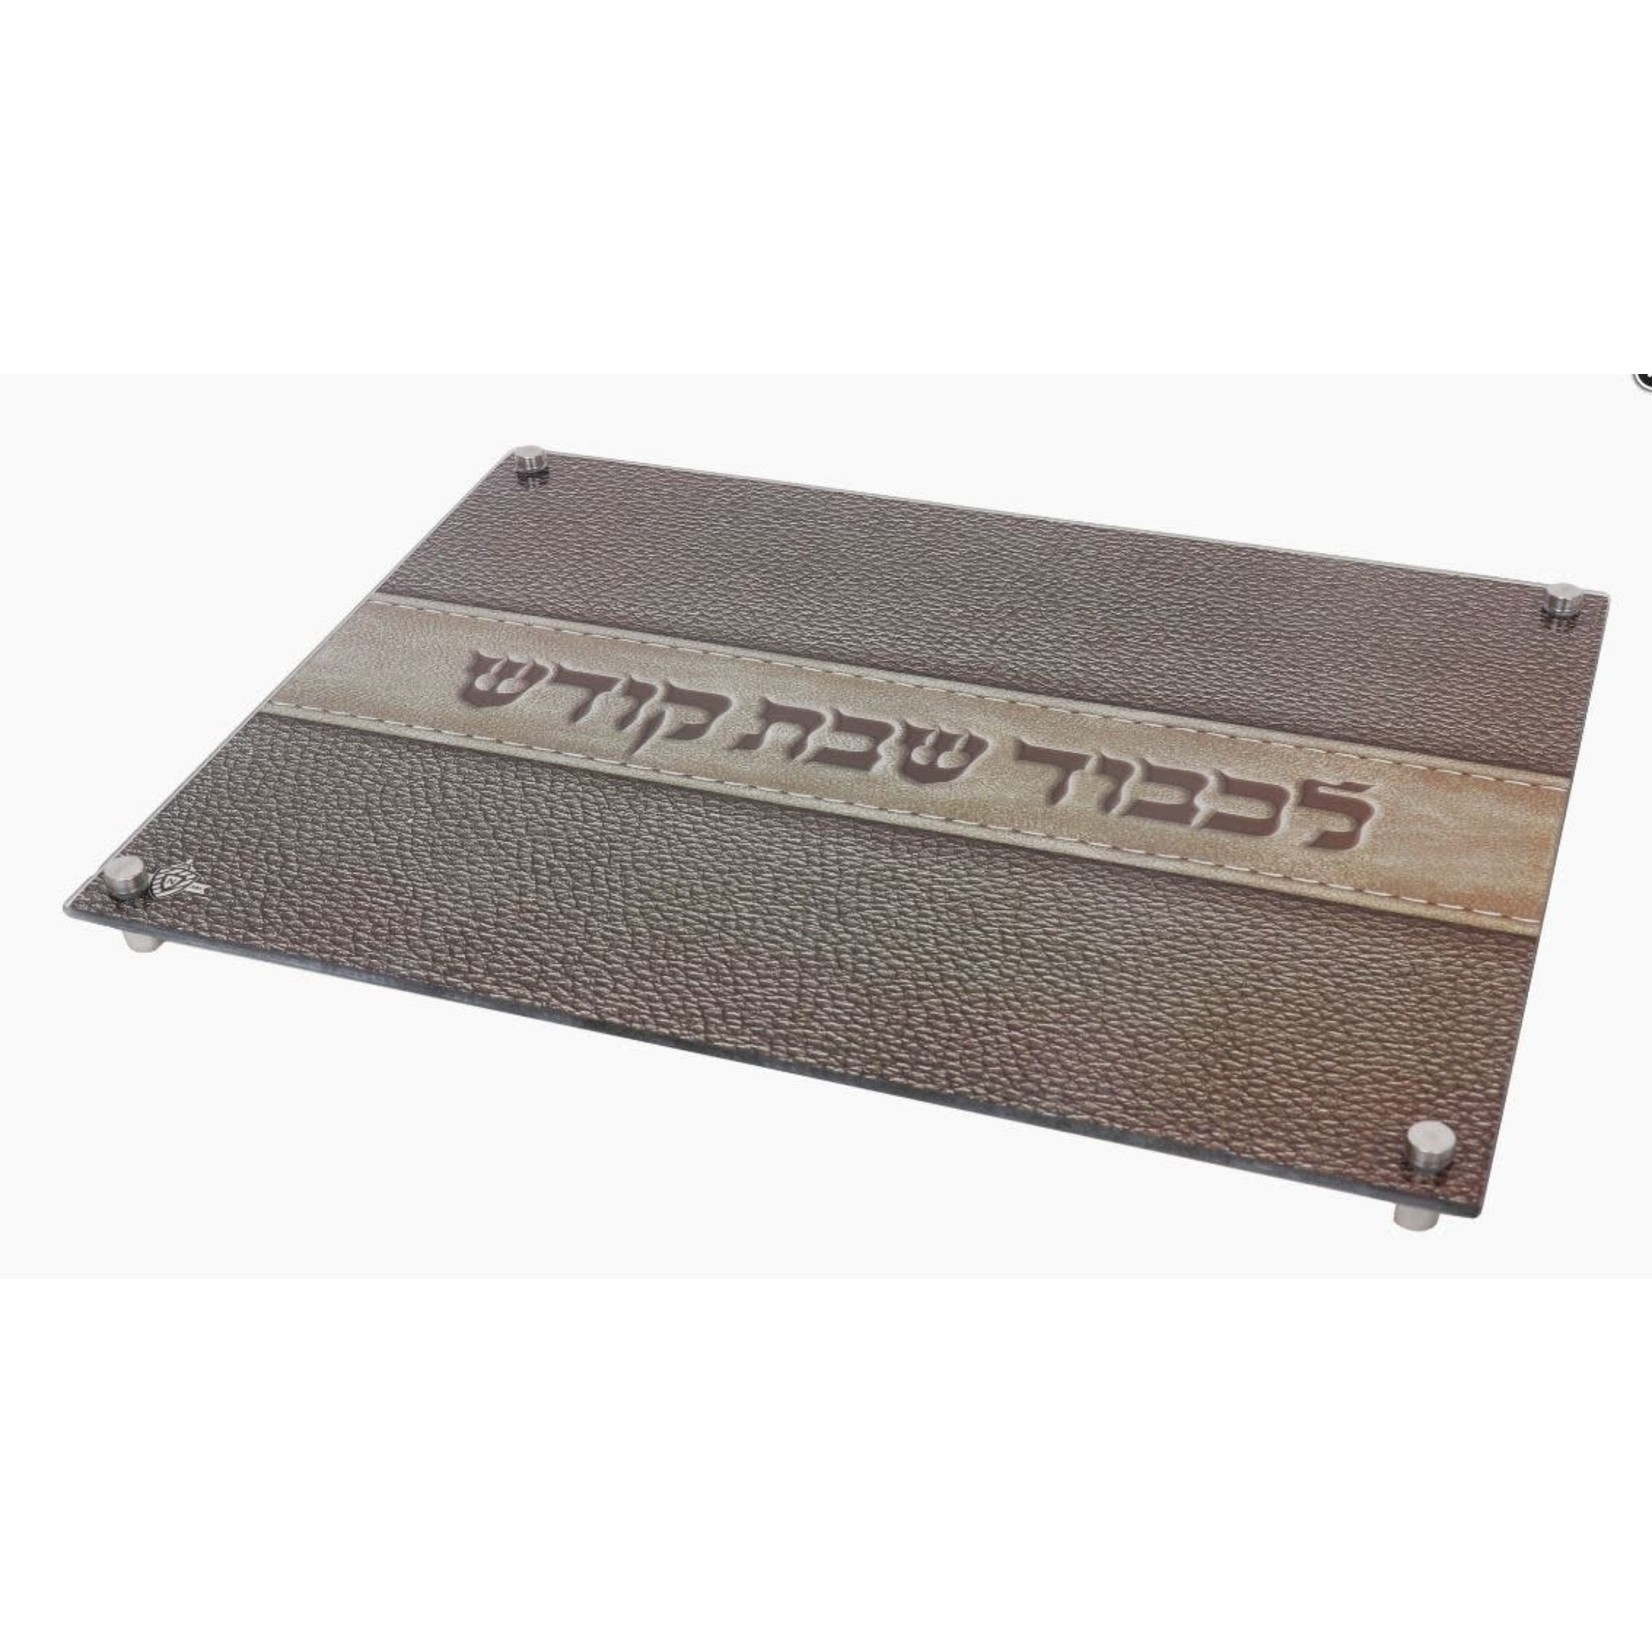 58298 Glass Challah Board gray leather style with Stand Offs  12x16"